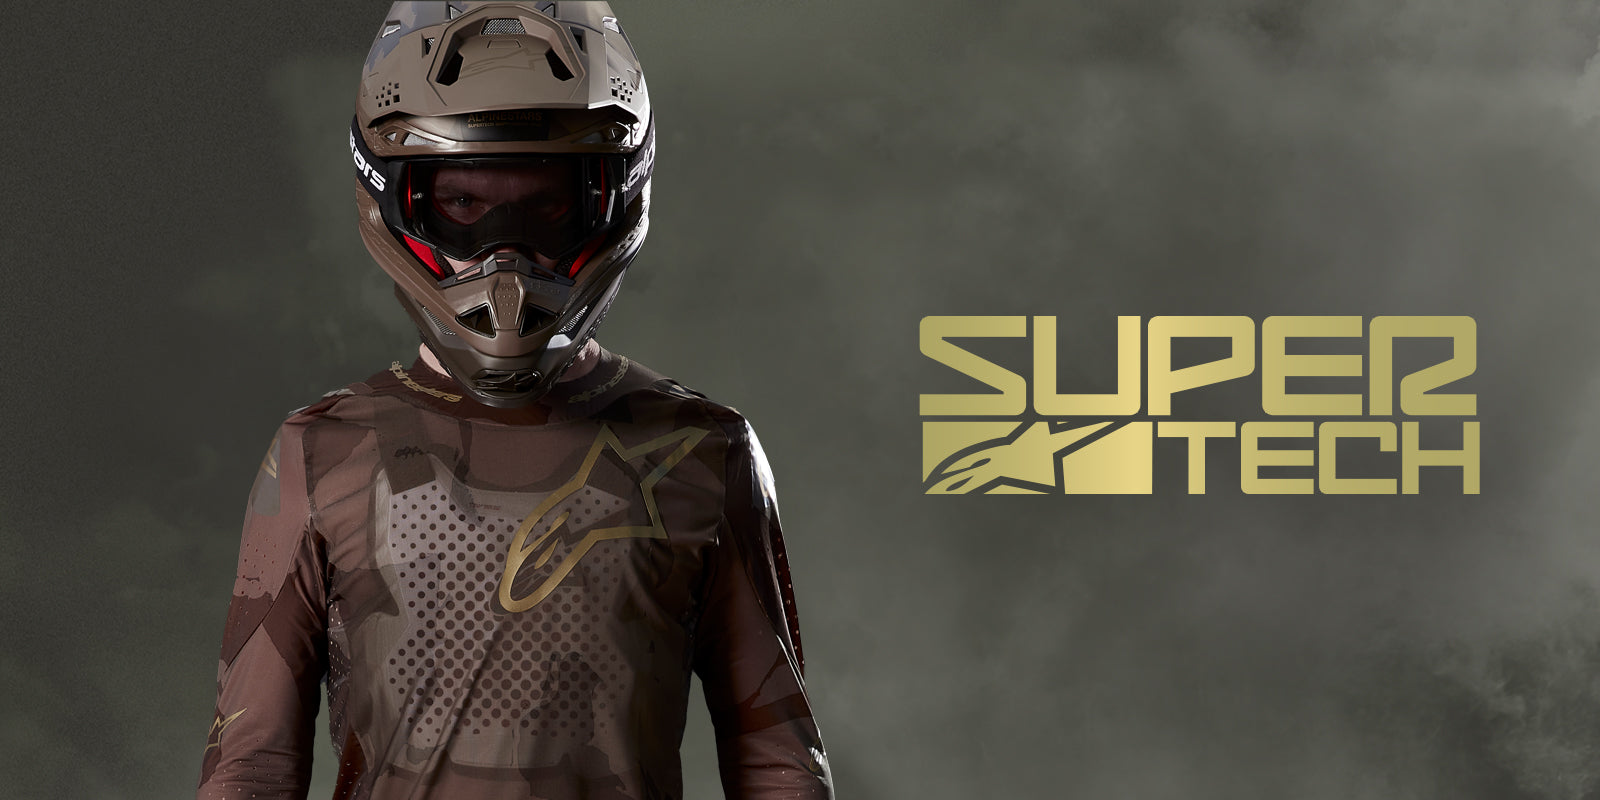 Limited Edition Supertech Squad 23 Jersey